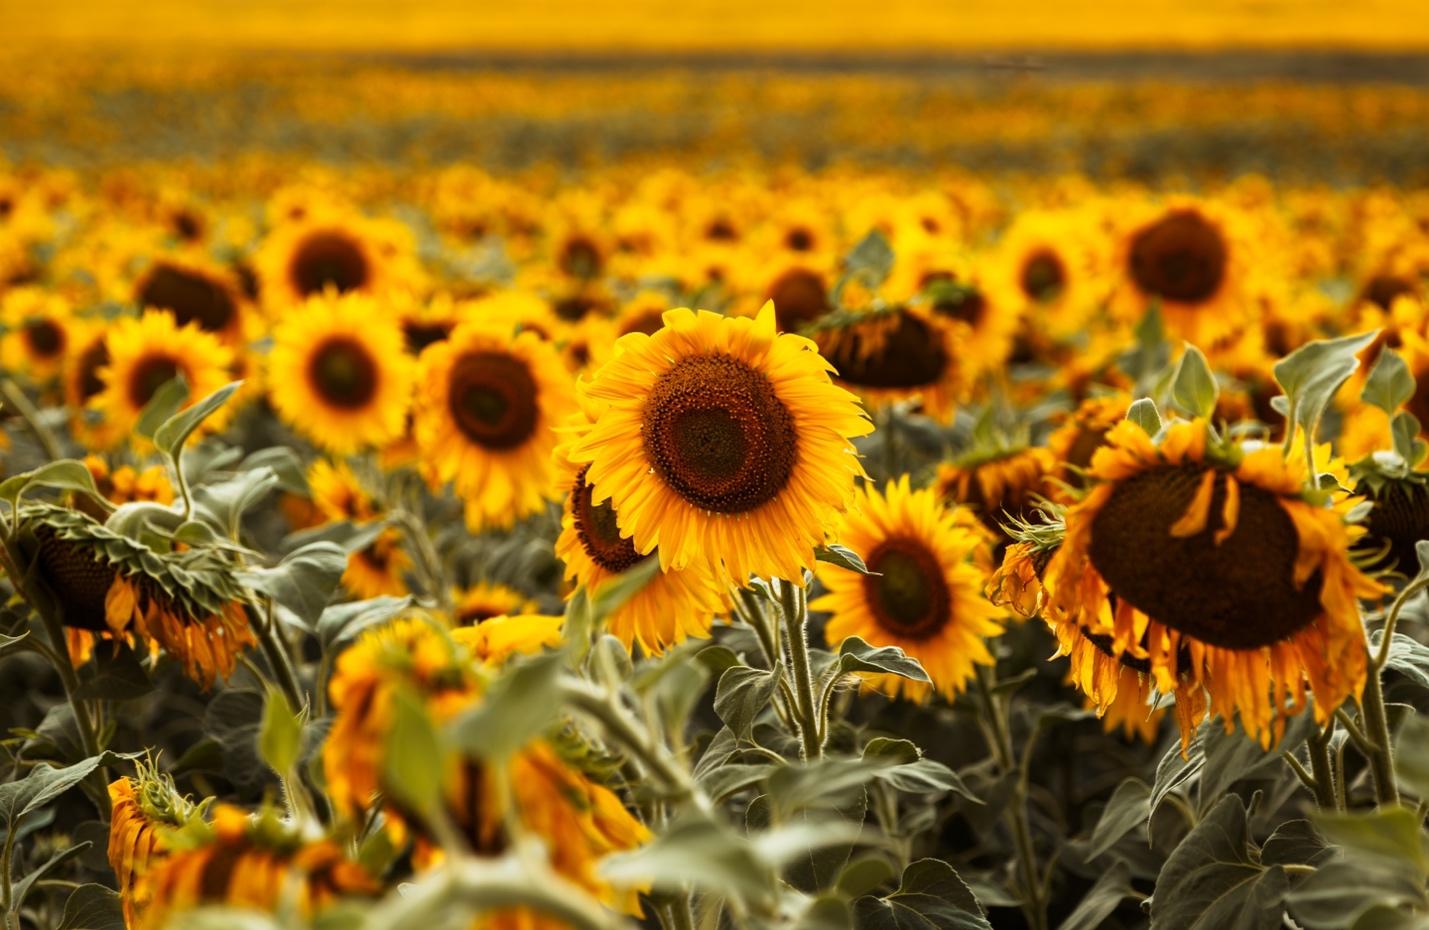 The Ultimate Guide to Caring for Sunflowers